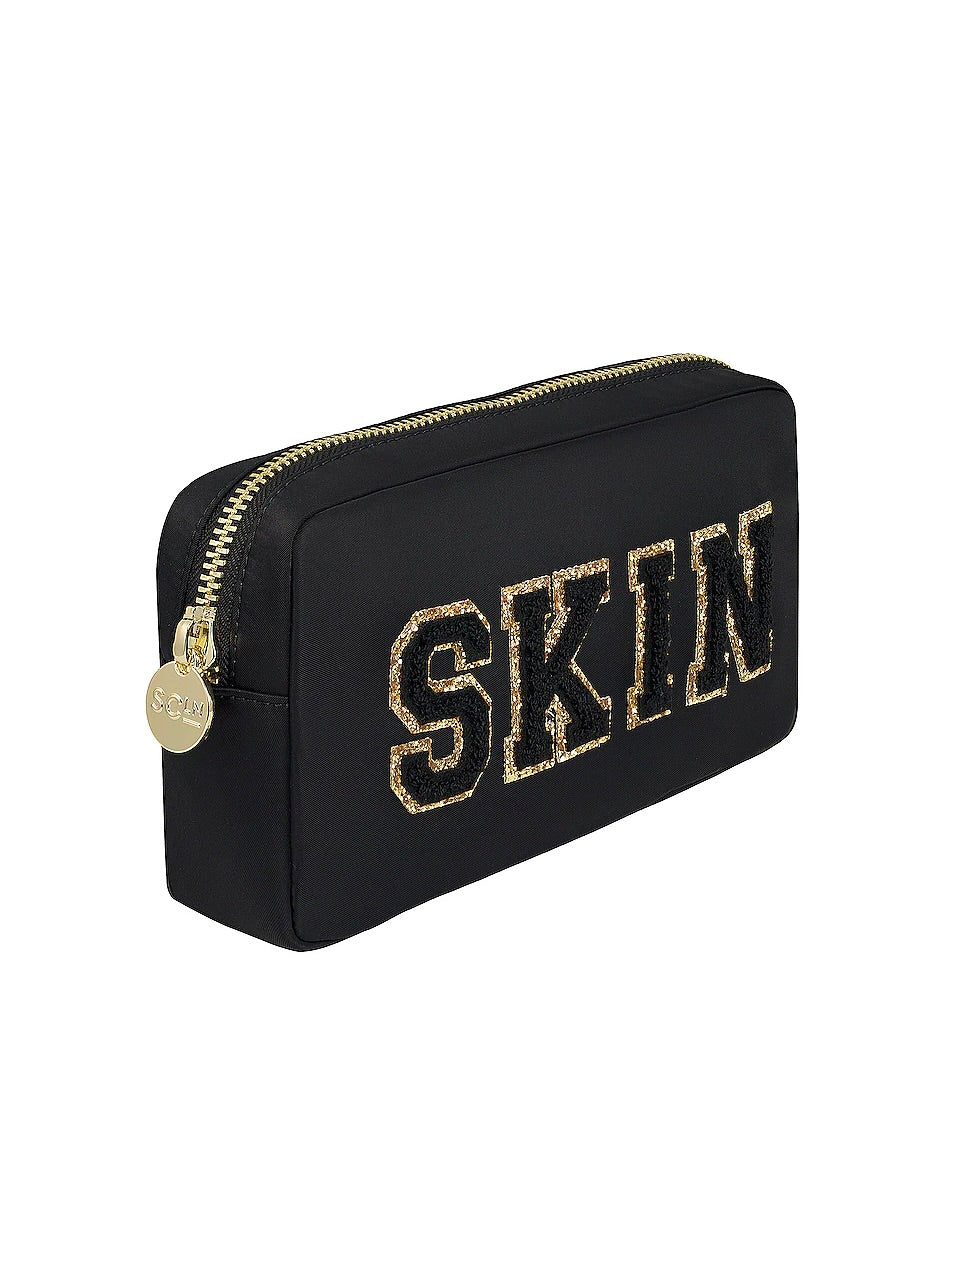 Small "Skin" Pouch